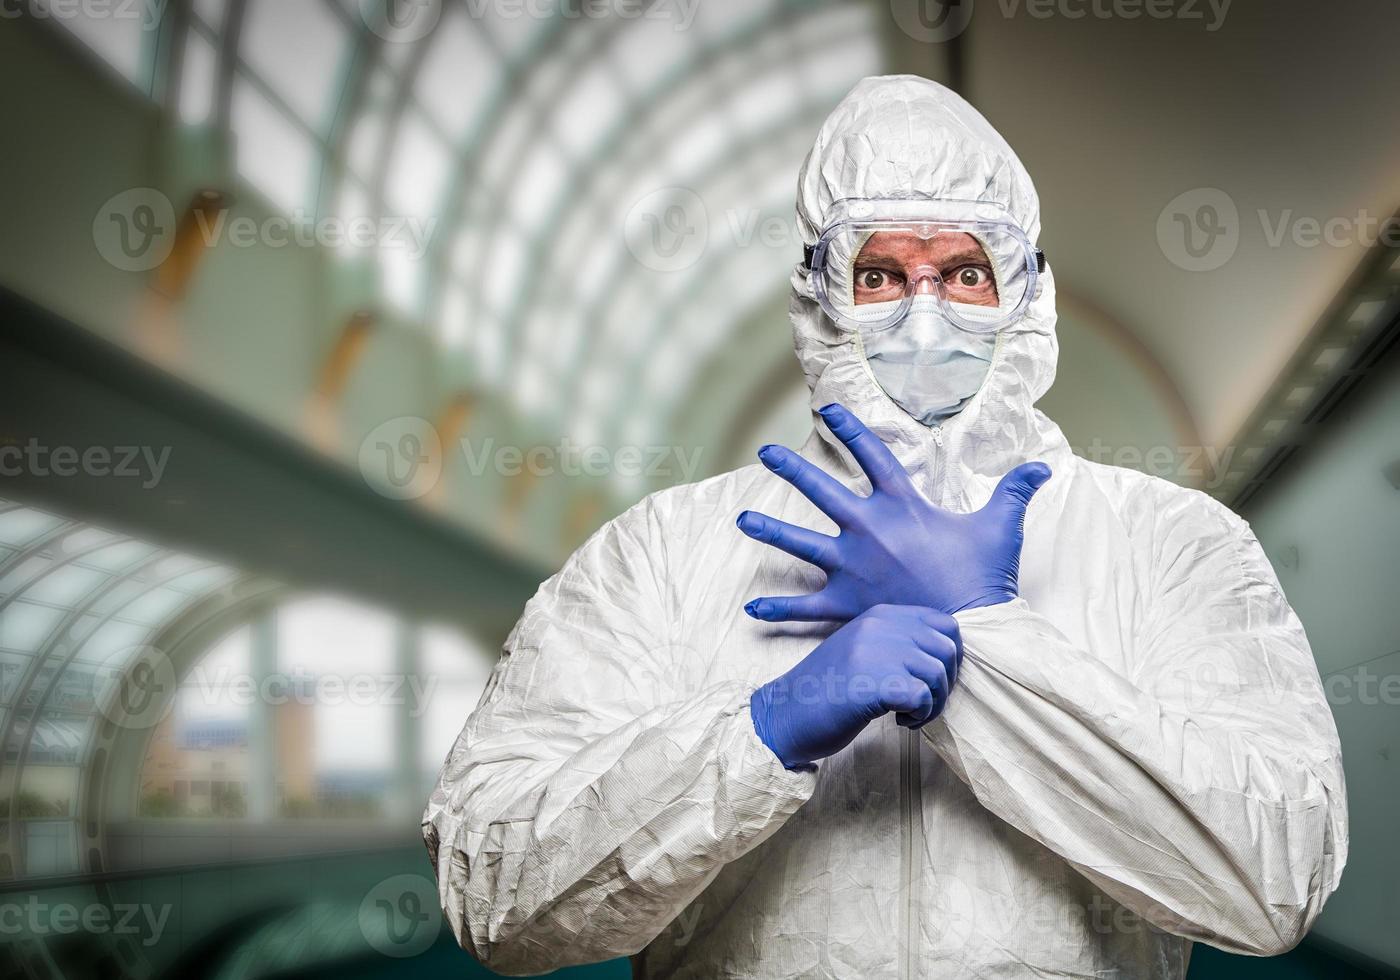 Man With Intense Expression Wearing HAZMAT Protective Clothing Inside Building photo